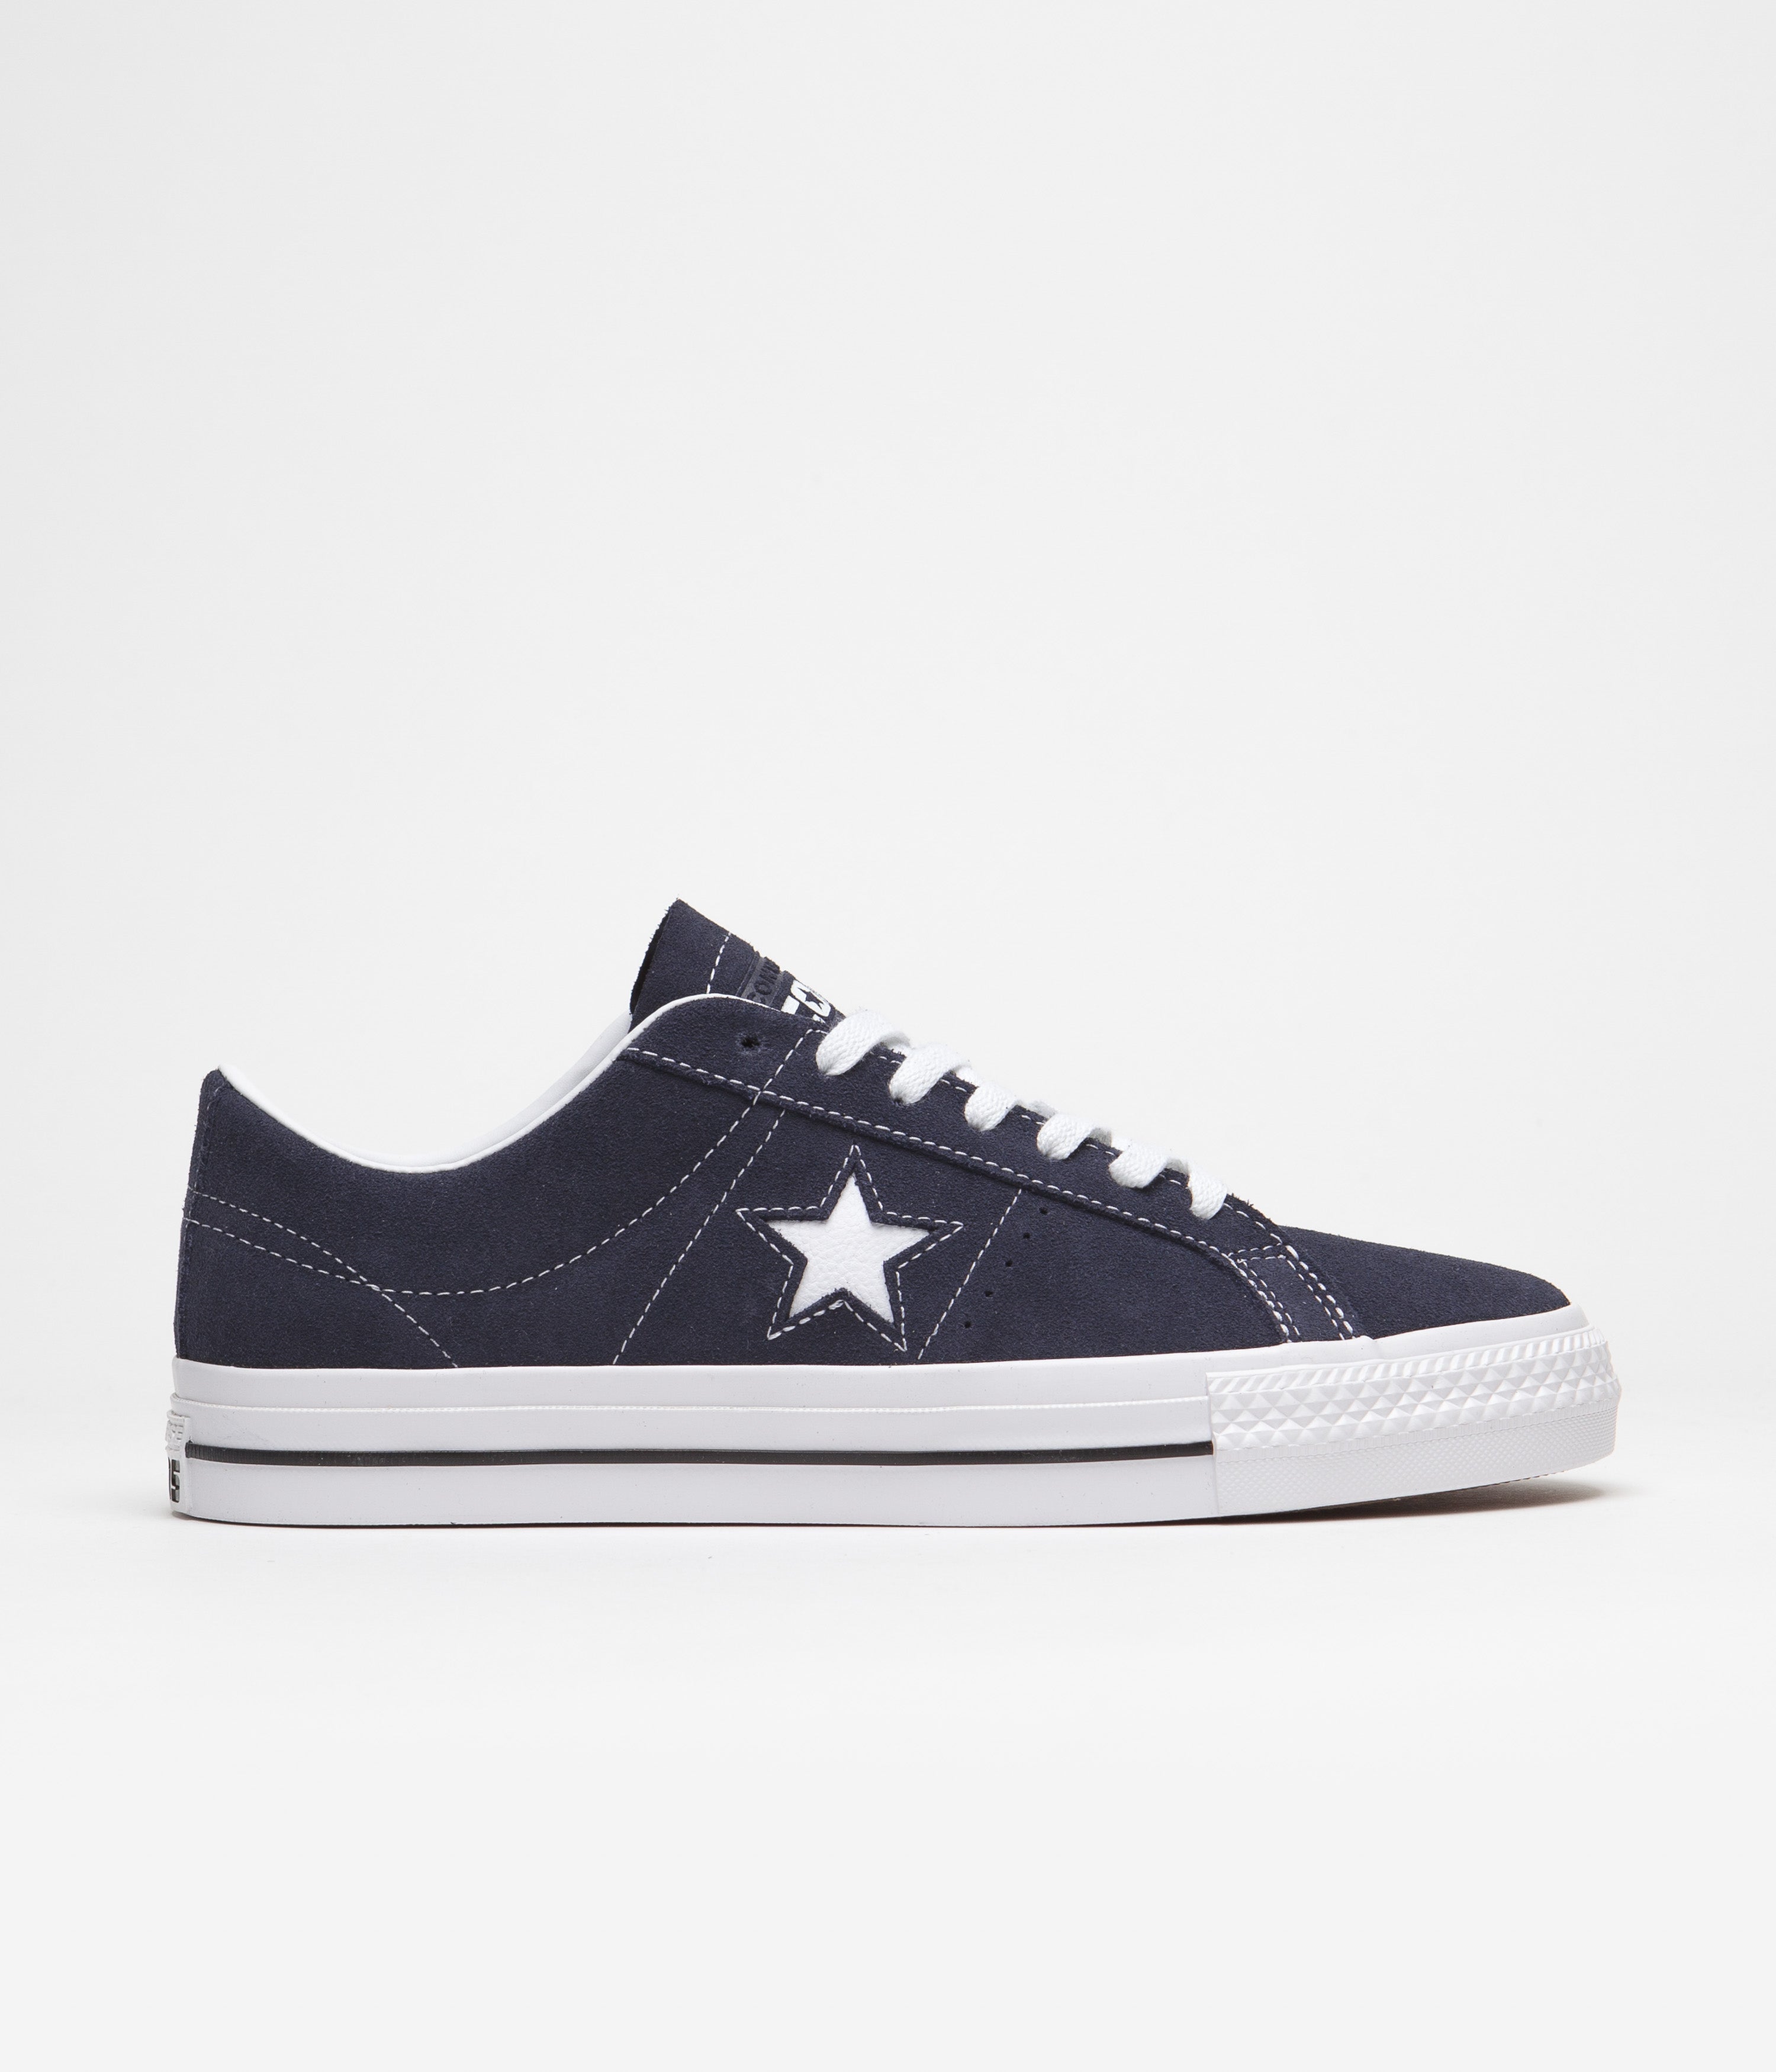 Converse One Star Classic Ox Shoes - Navy / White Black | Flatspot